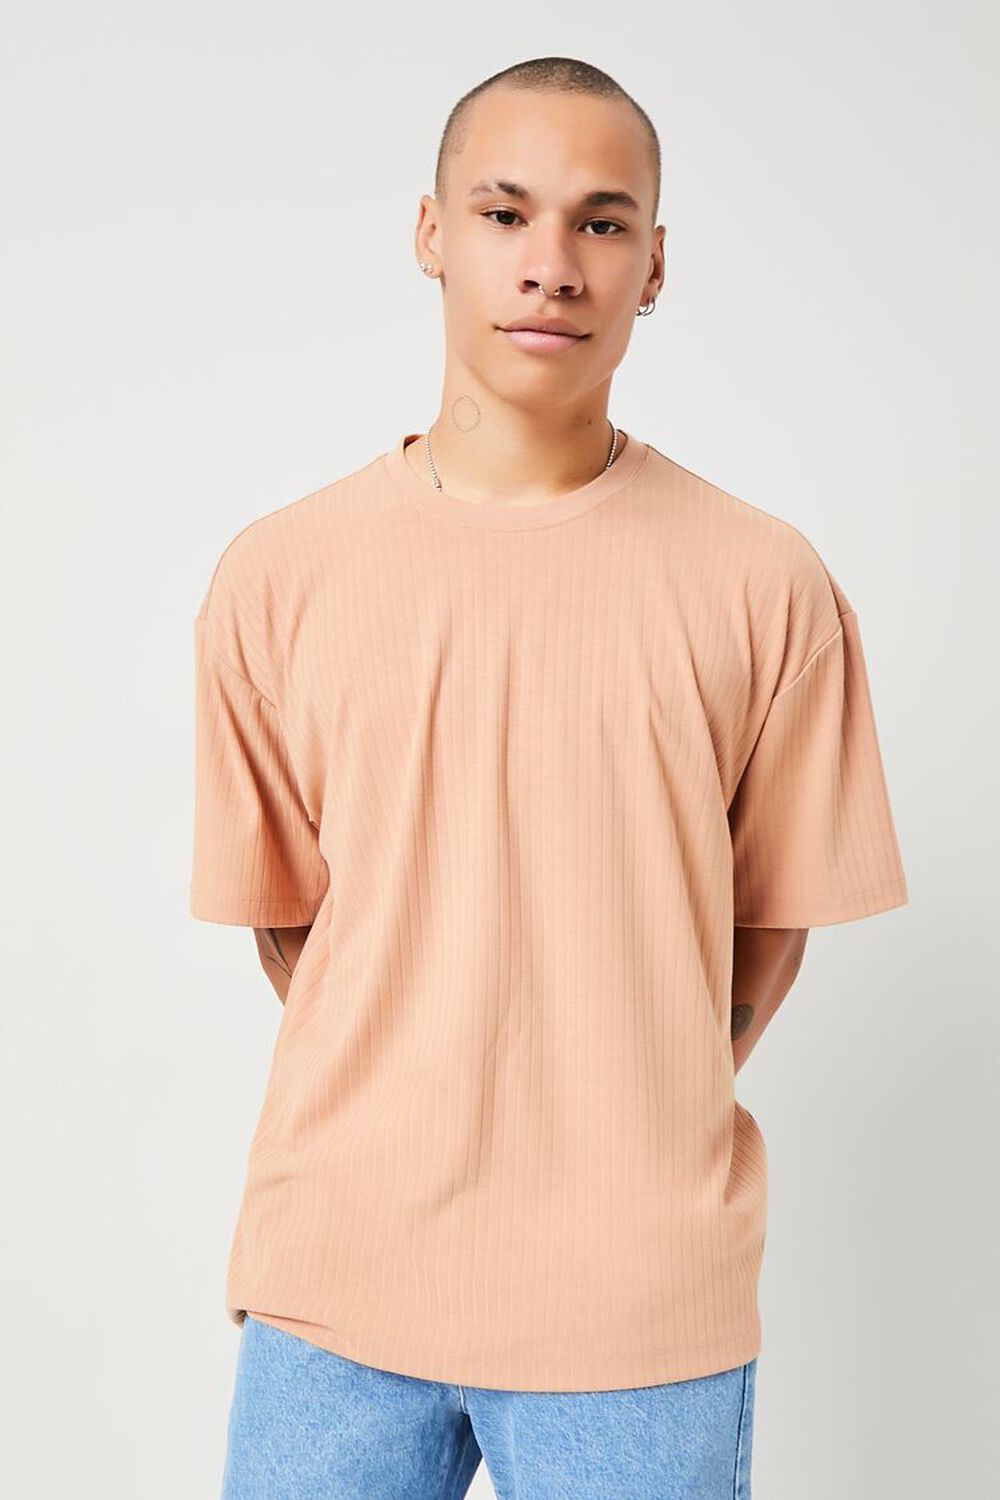 LIGHT BROWN Ribbed Crew Neck Tee, image 1